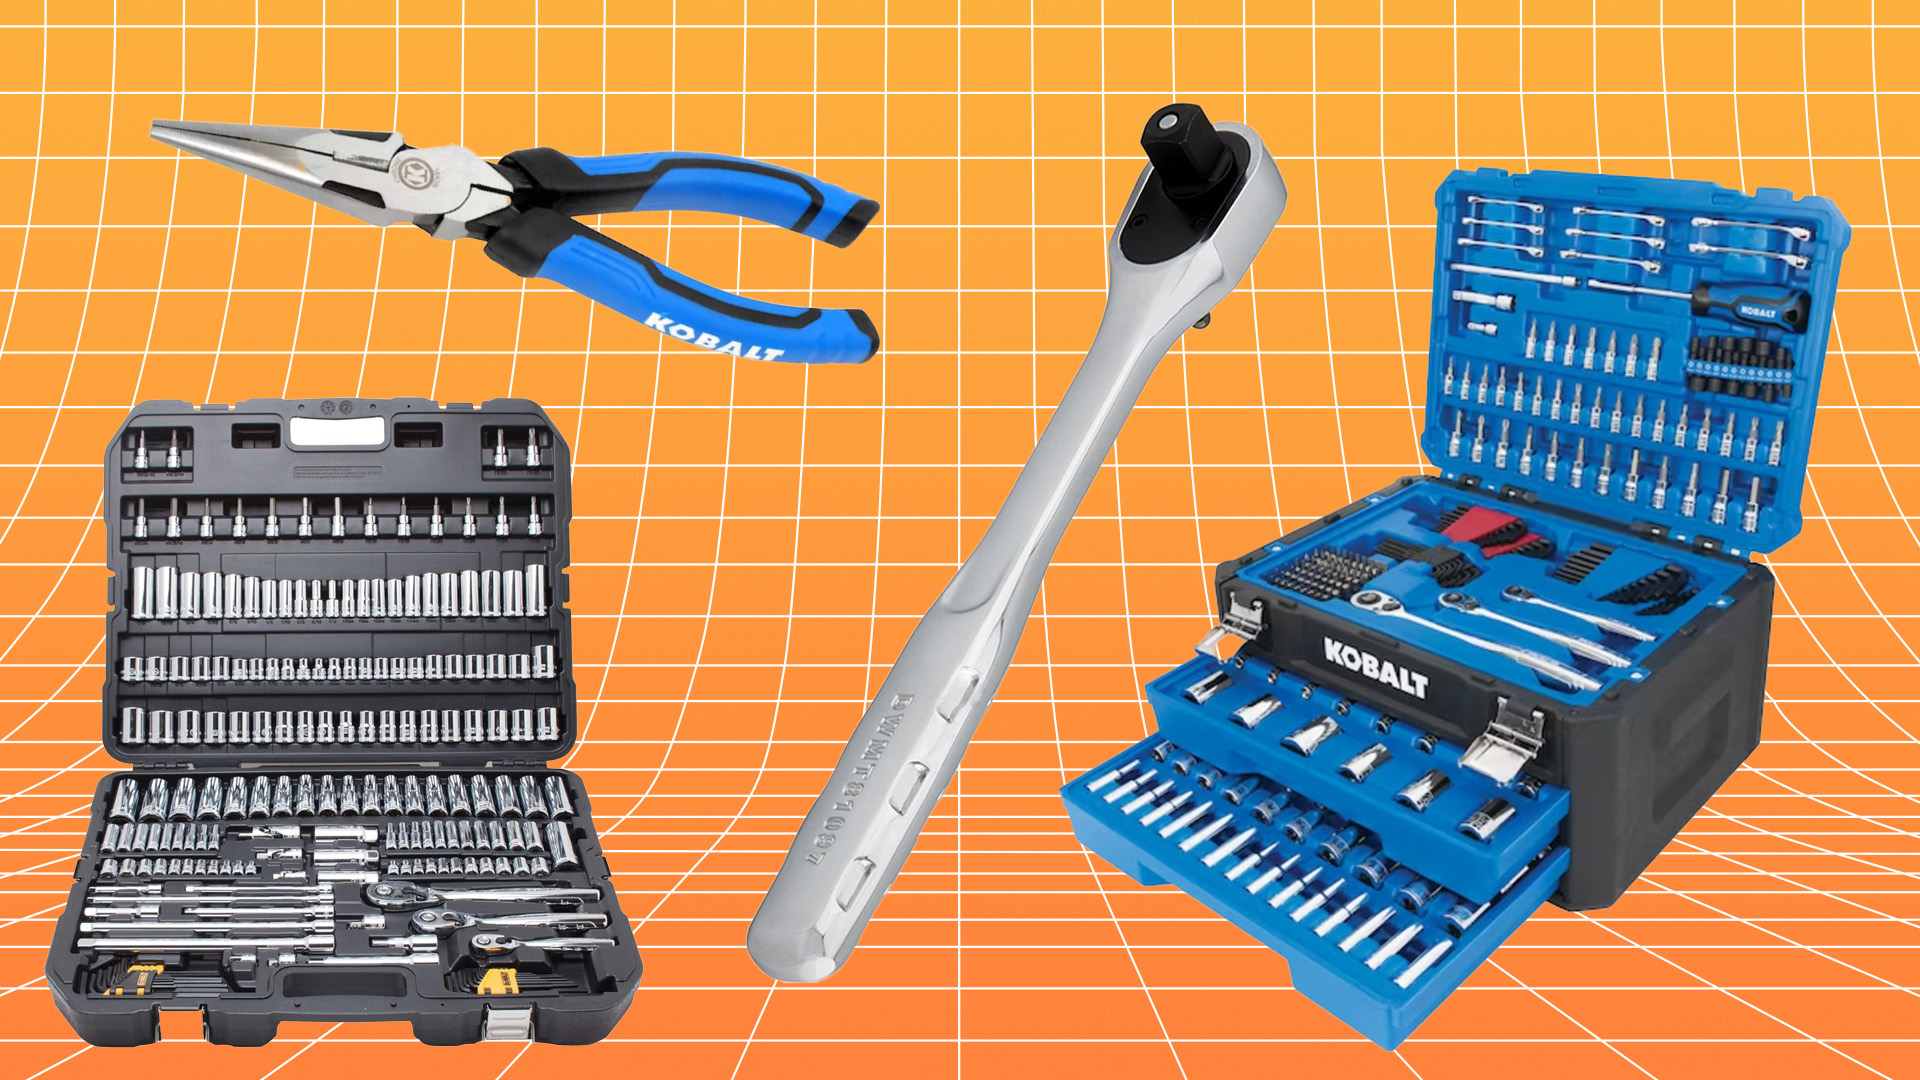 Cyber Monday Isn't Over With Huge Discounts on the Best Mechanics Tools Sets